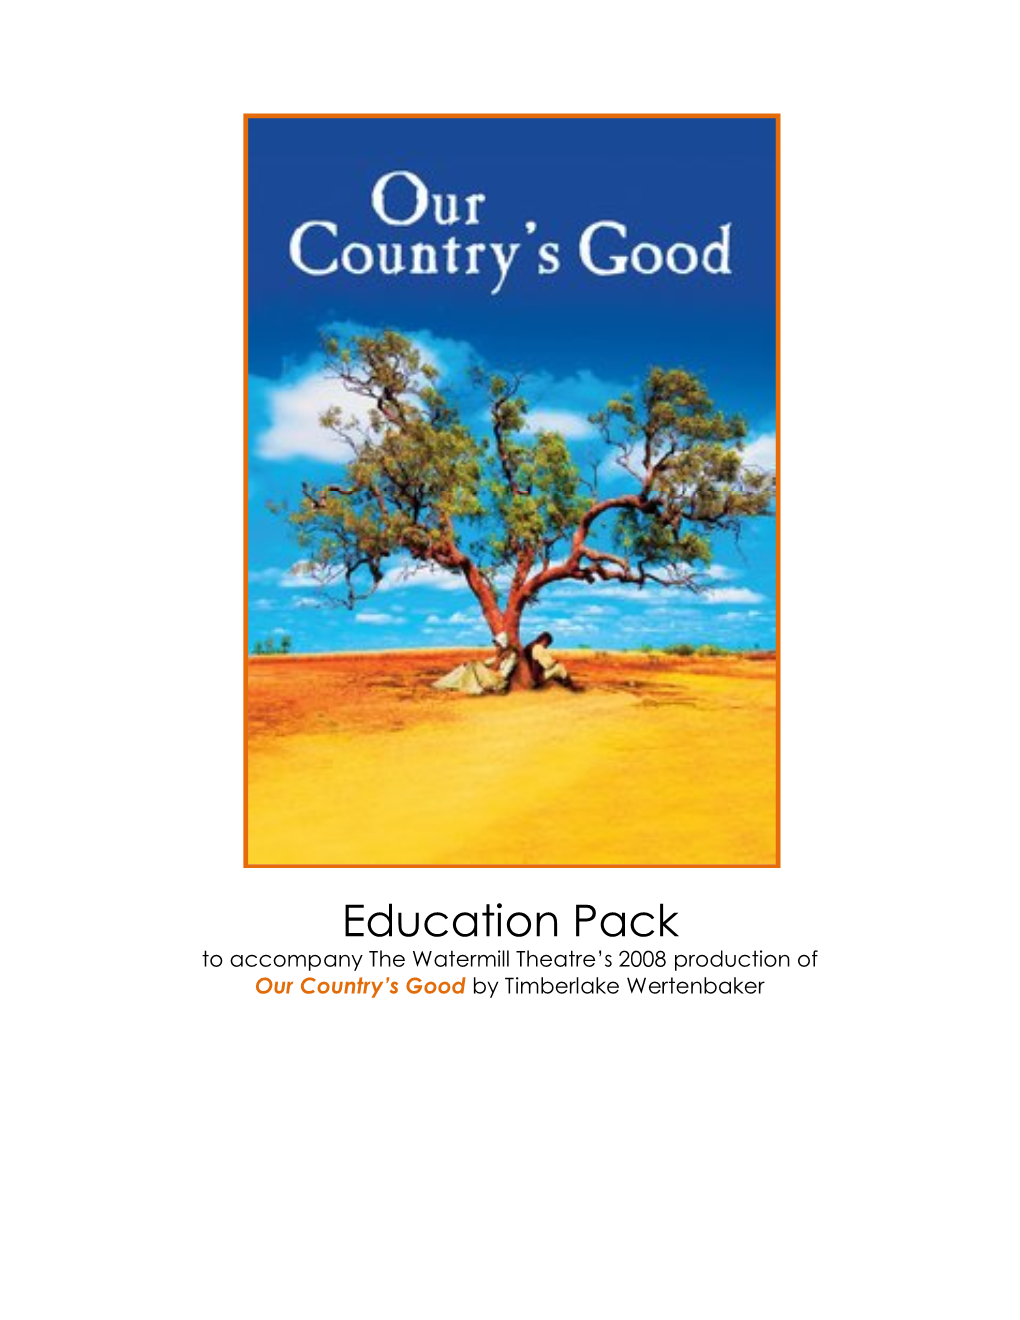 Education Pack to Accompany the Watermill Theatre’S 2008 Production of Our Country’S Good by Timberlake Wertenbaker